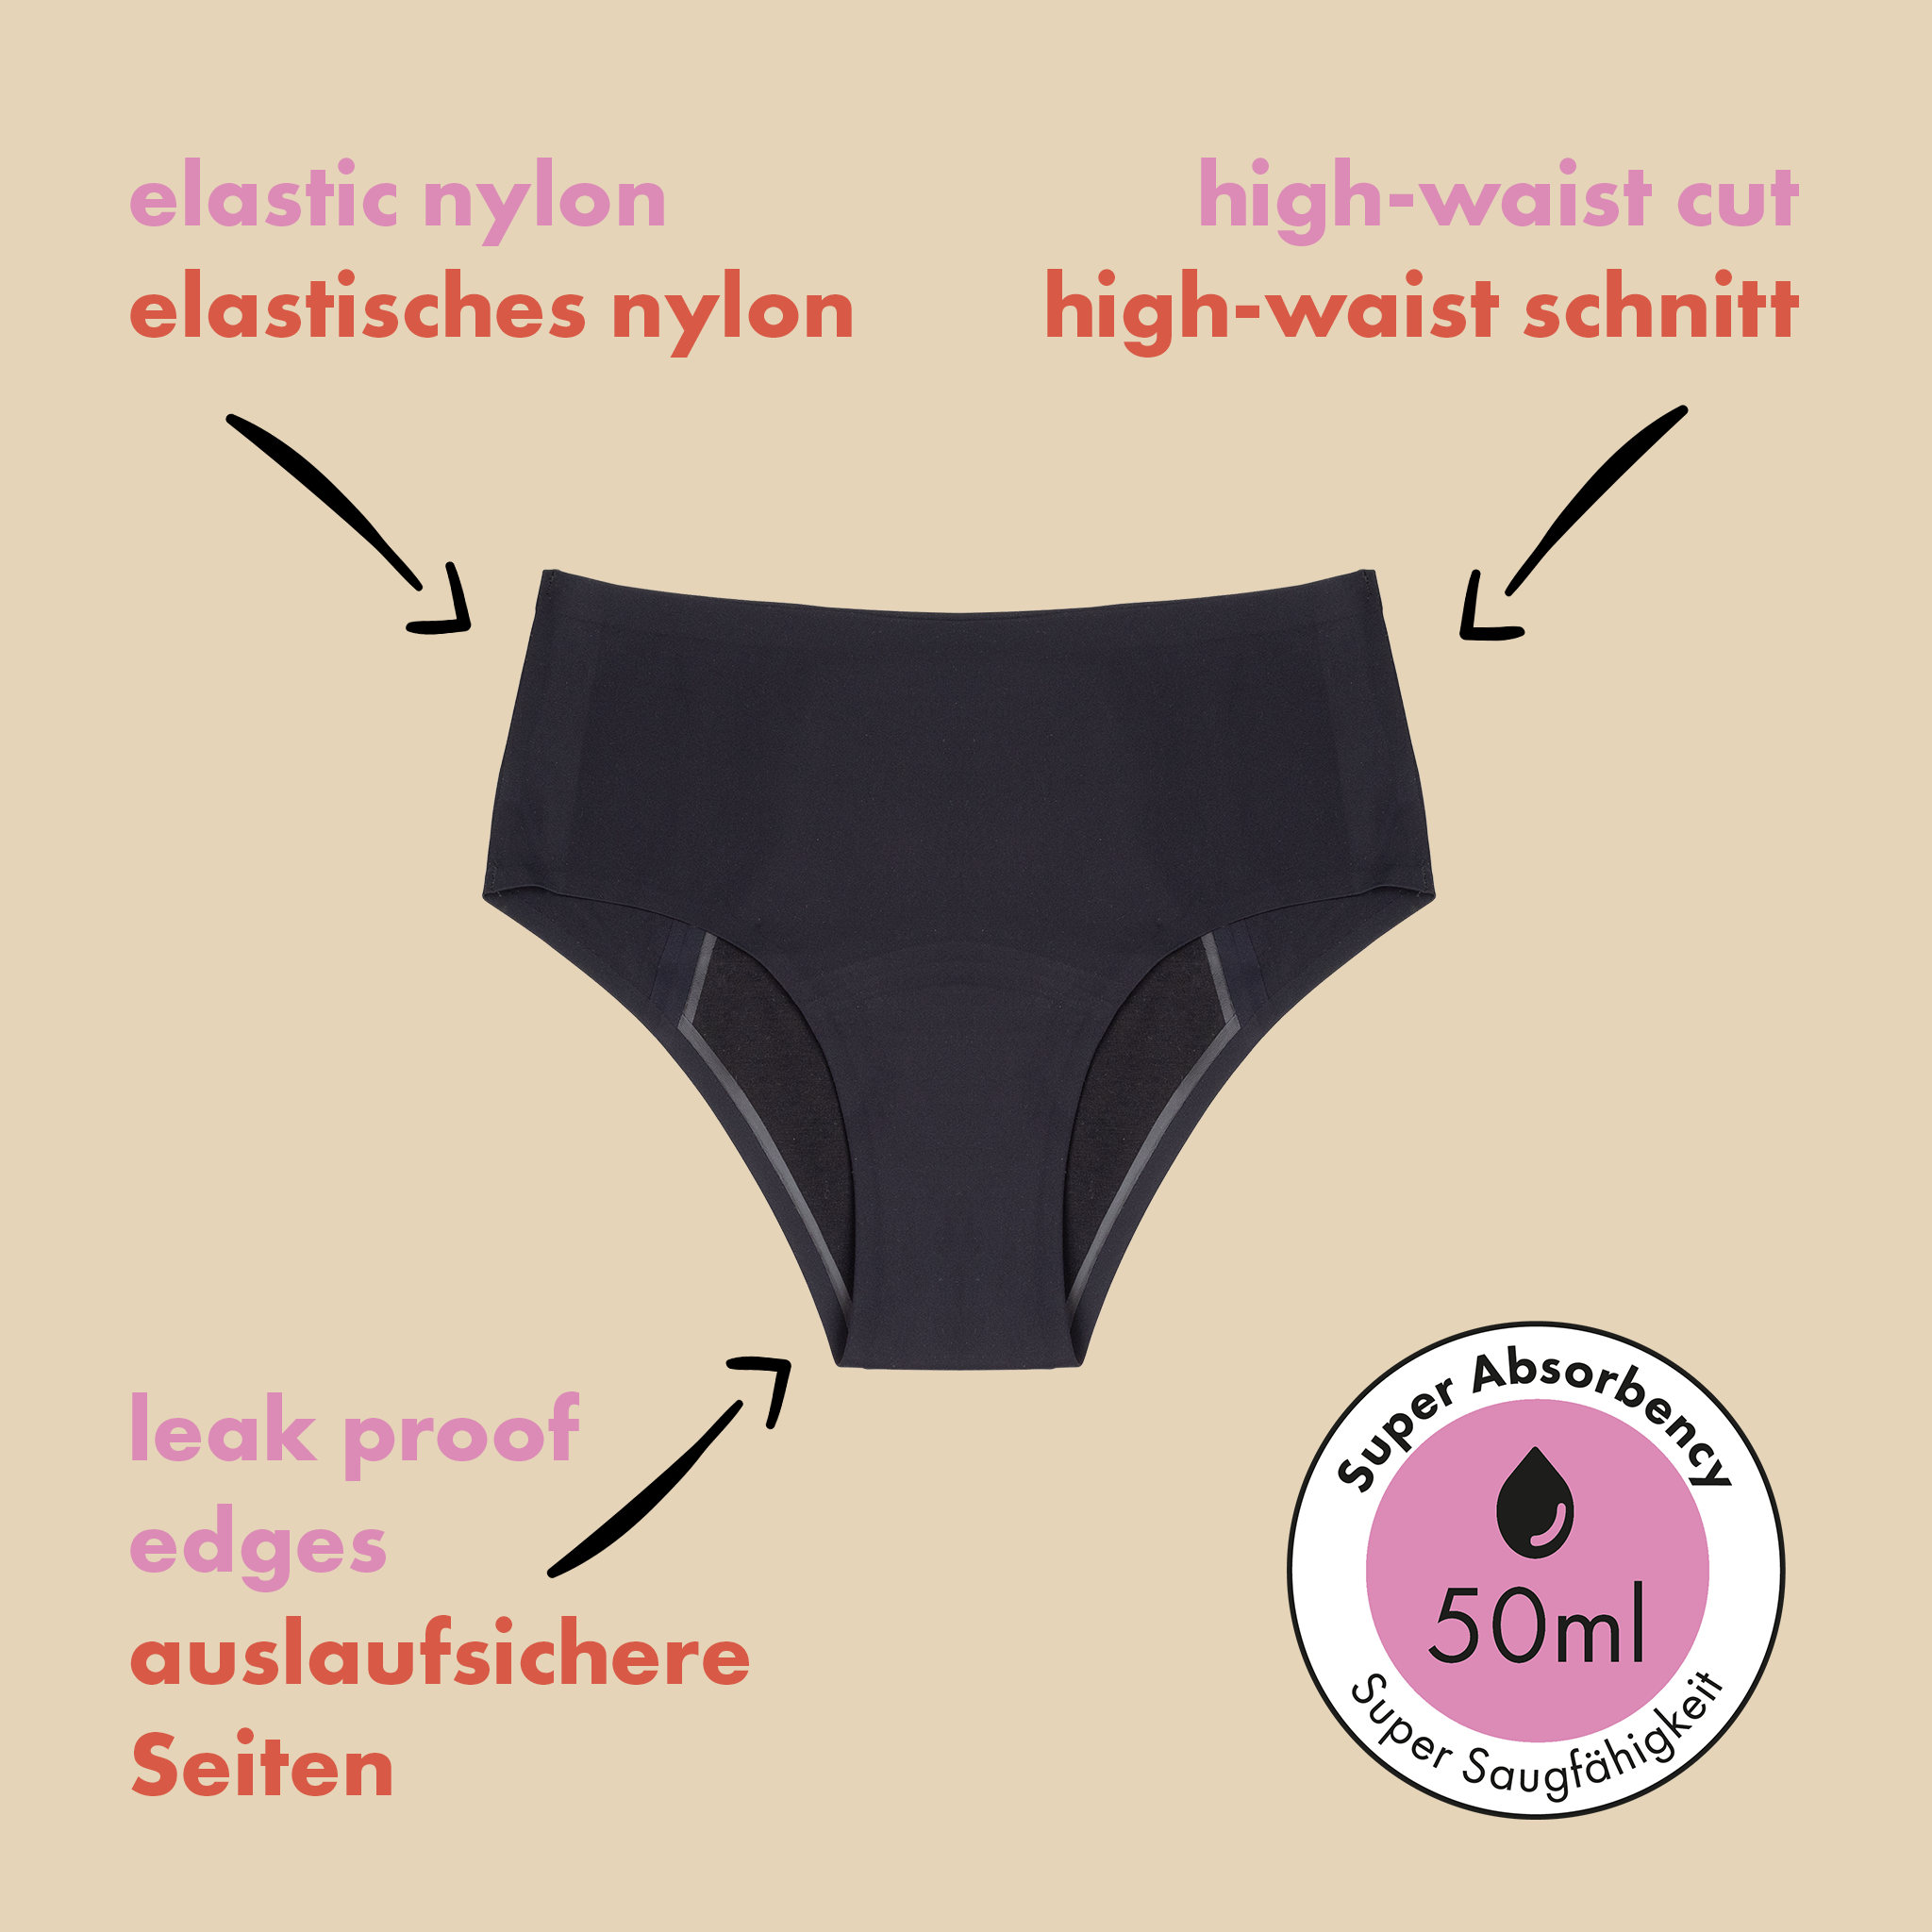 dais absorbent underwear for bladder leaks in high waist cut in black colour with product benefits shown of elastic nylon, high-waist cut, leak proof edges and super absorbency from up to 50ml. 